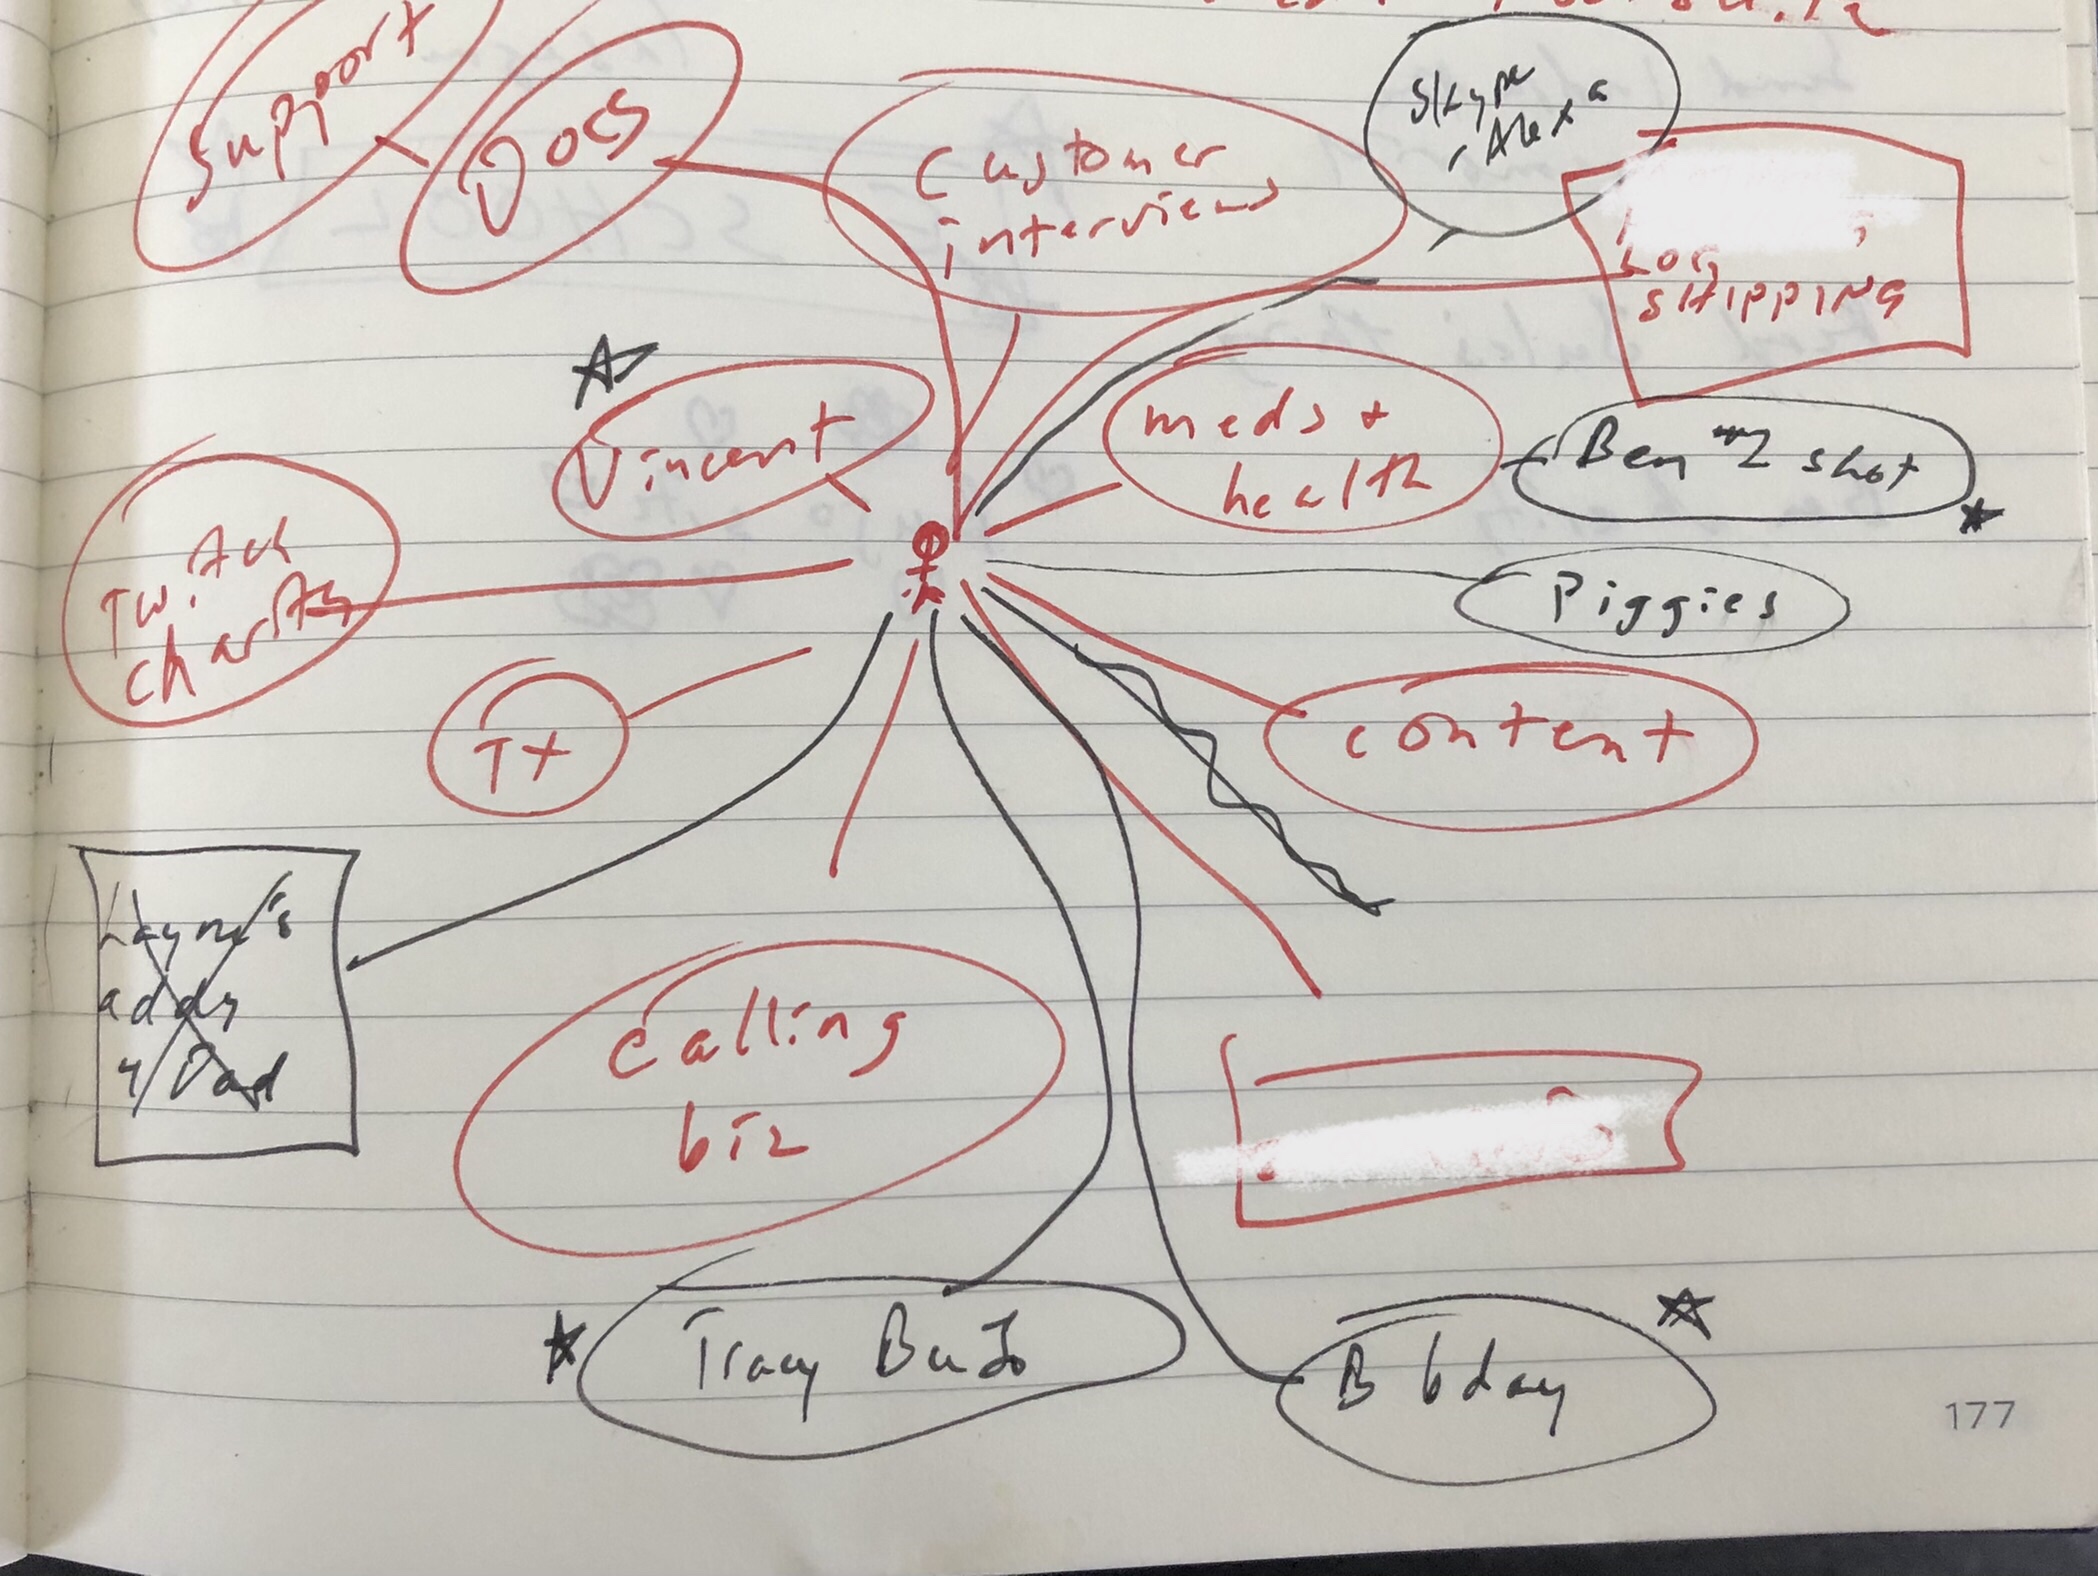 Photo of a hand drawn mind map: tiny stick figure drawn in red ink, surrounded by randomly sized/distributed "balloons", each with a small note in it (like "B bday" and "TX").